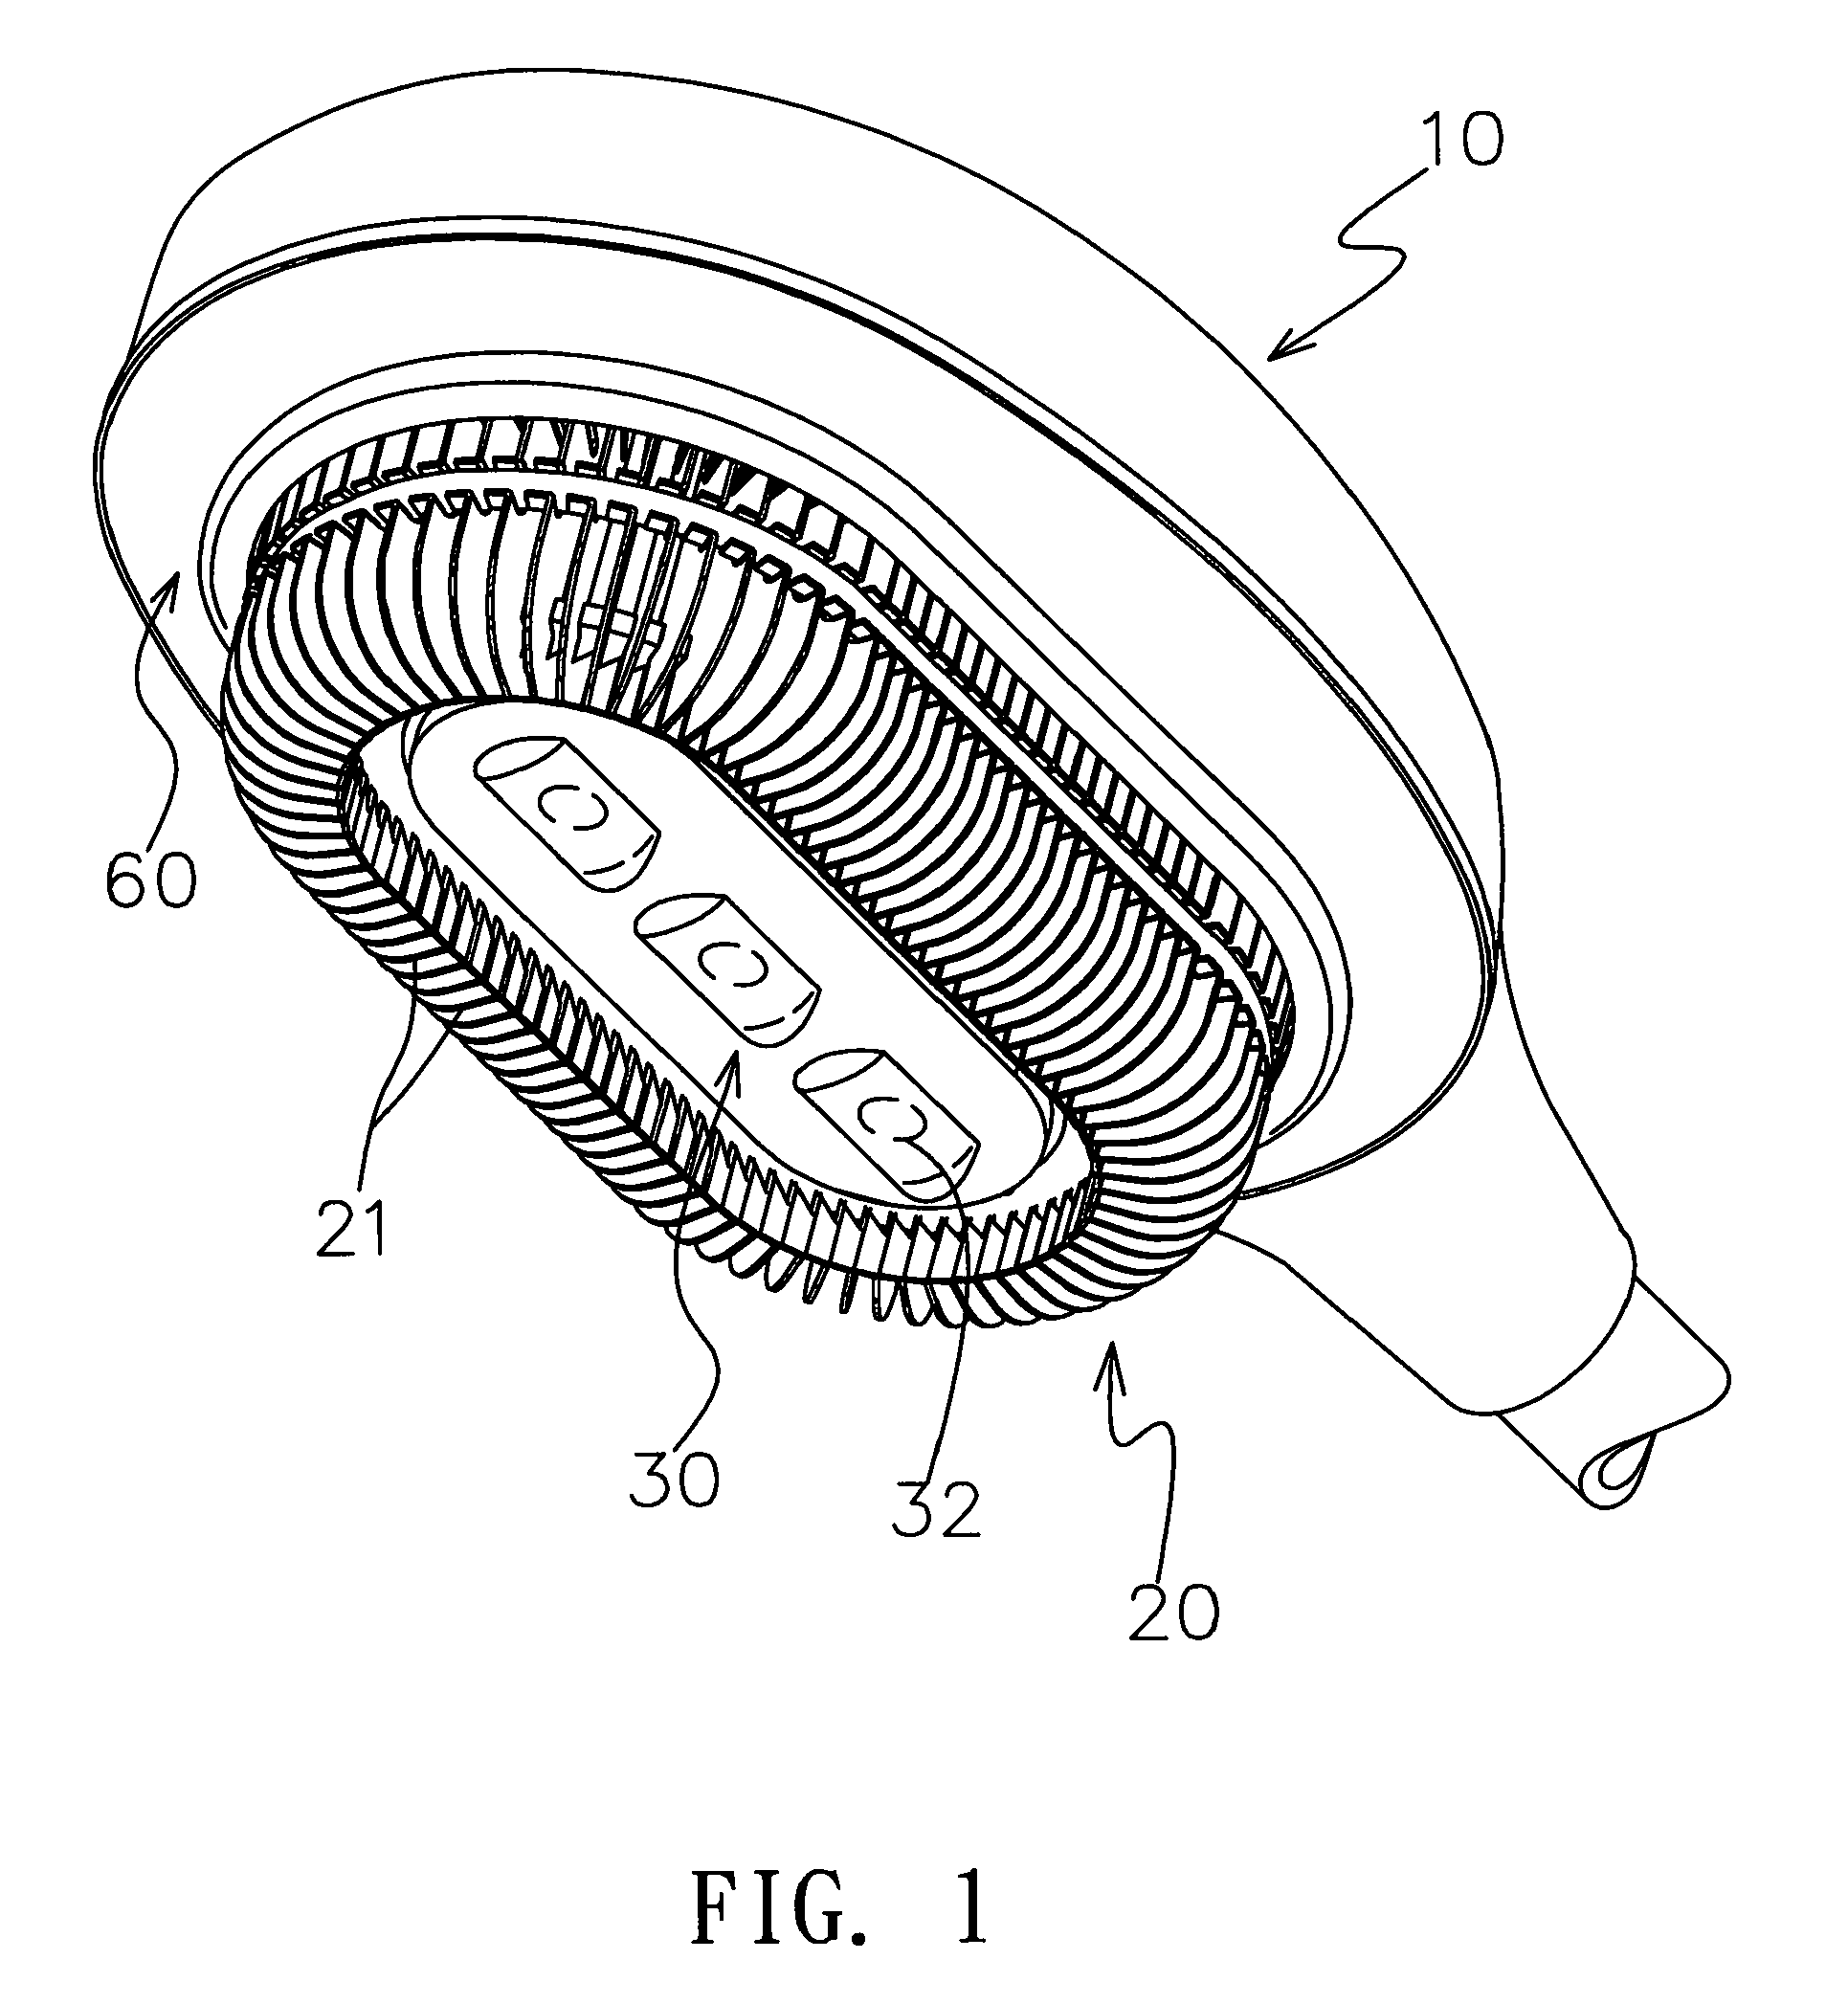 Apparatus for fixing LED light engine to lamp fixture